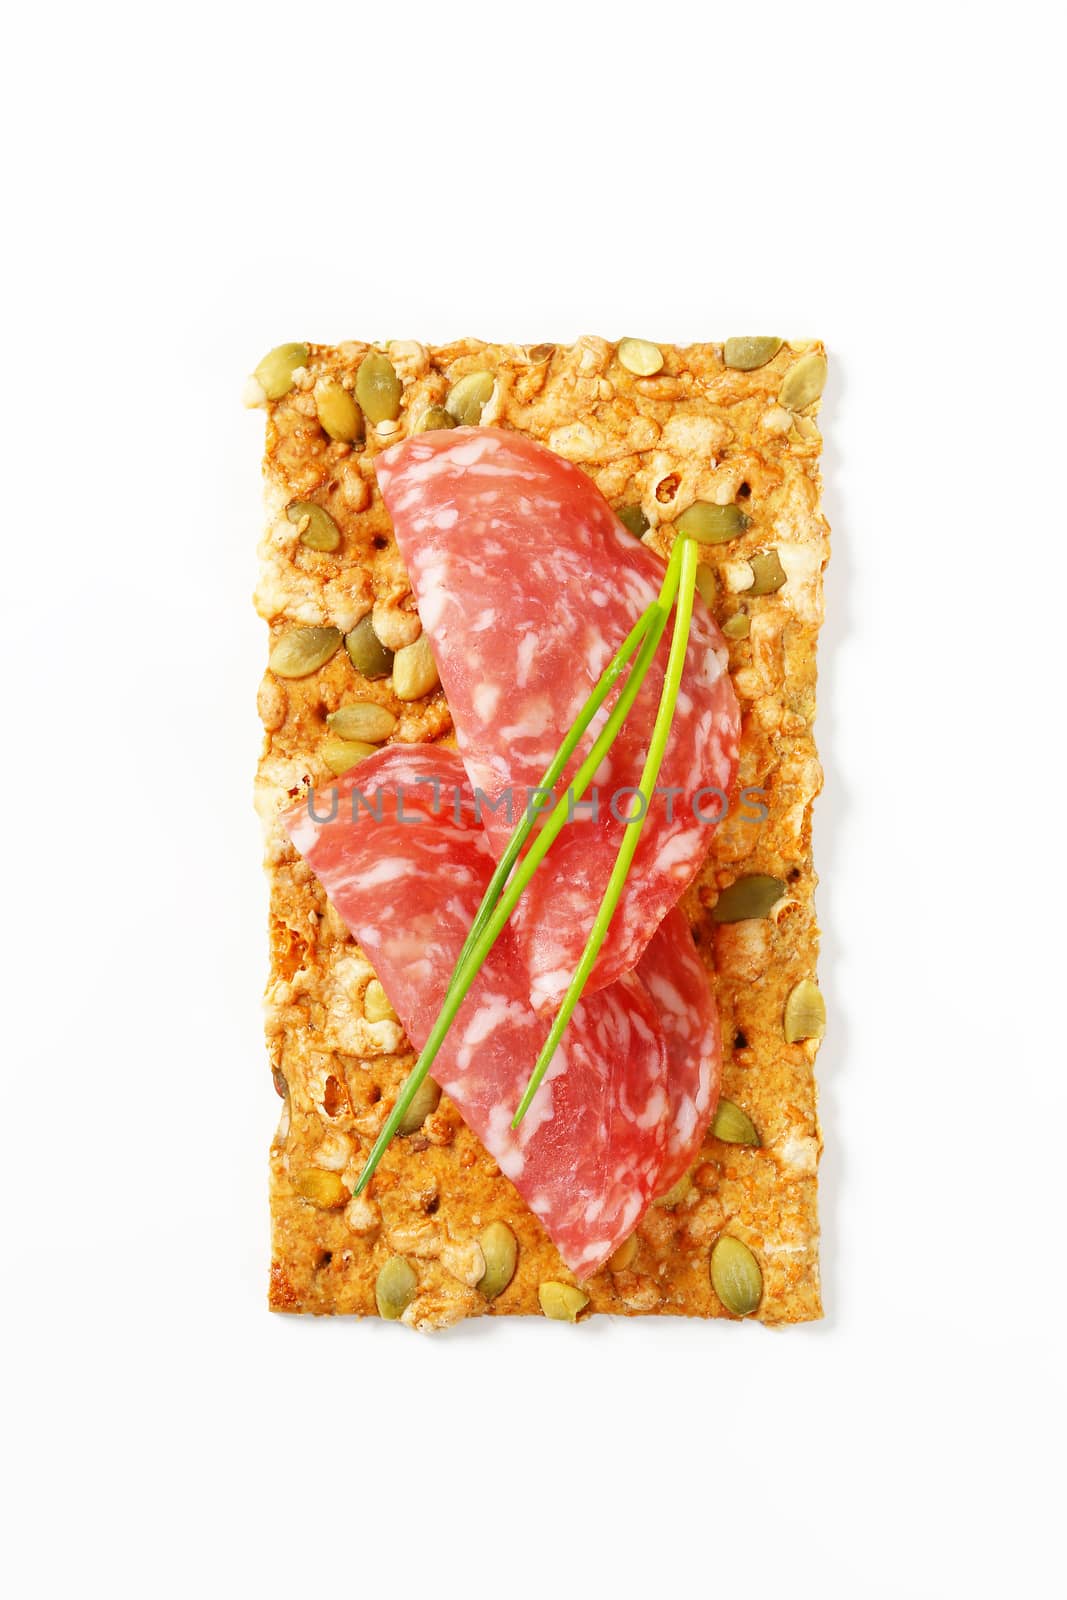 pumpkin seed cracker with thin slices of dry salami sausage